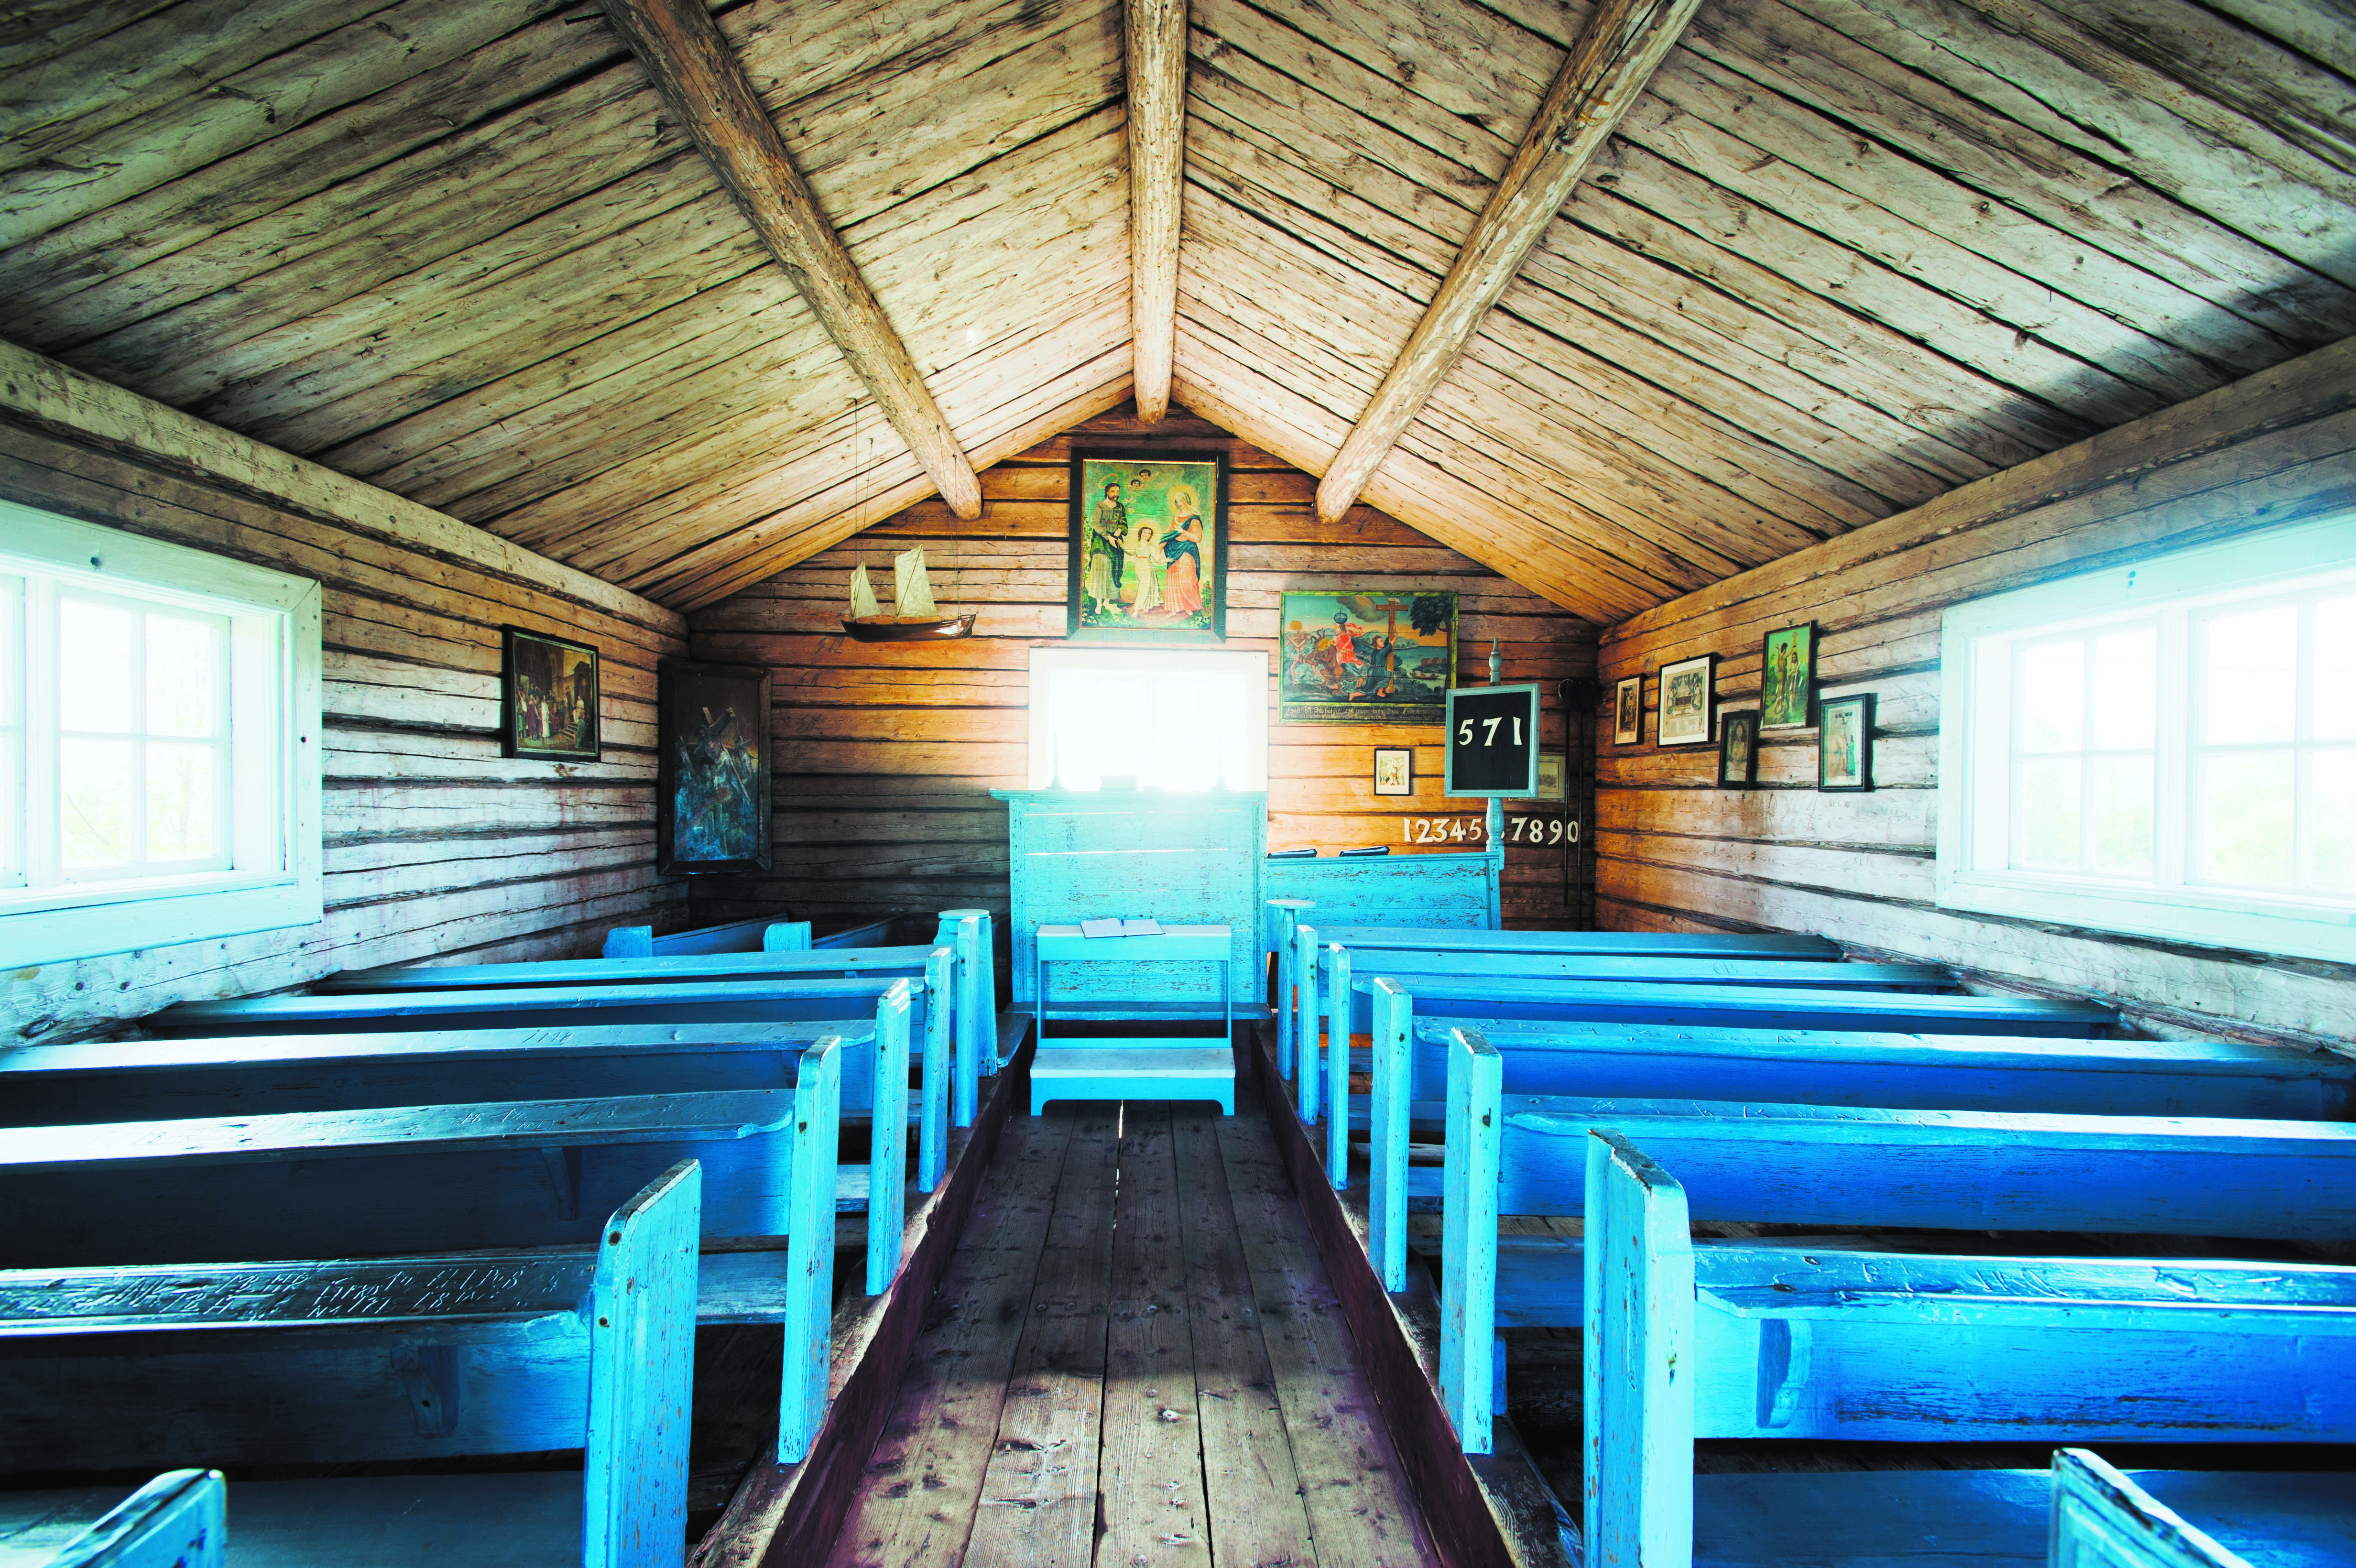 Interiors of a 18th century wooden church